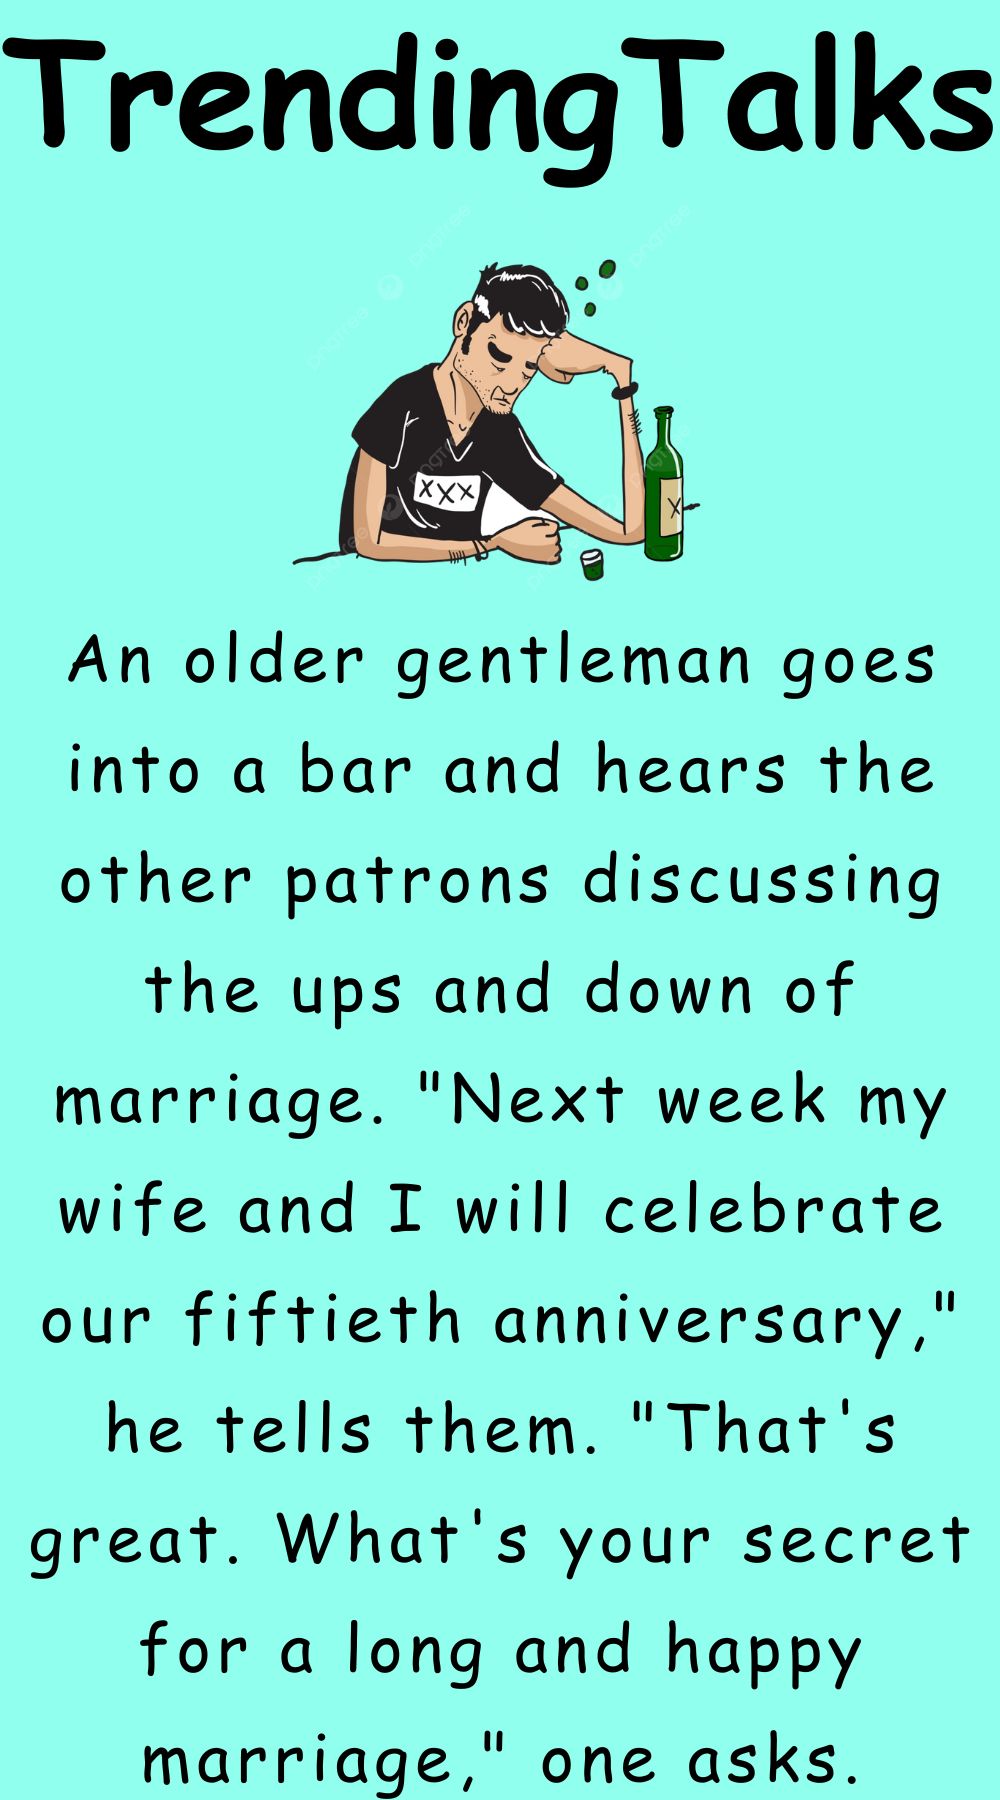 An older gentleman goes into a bar and hears